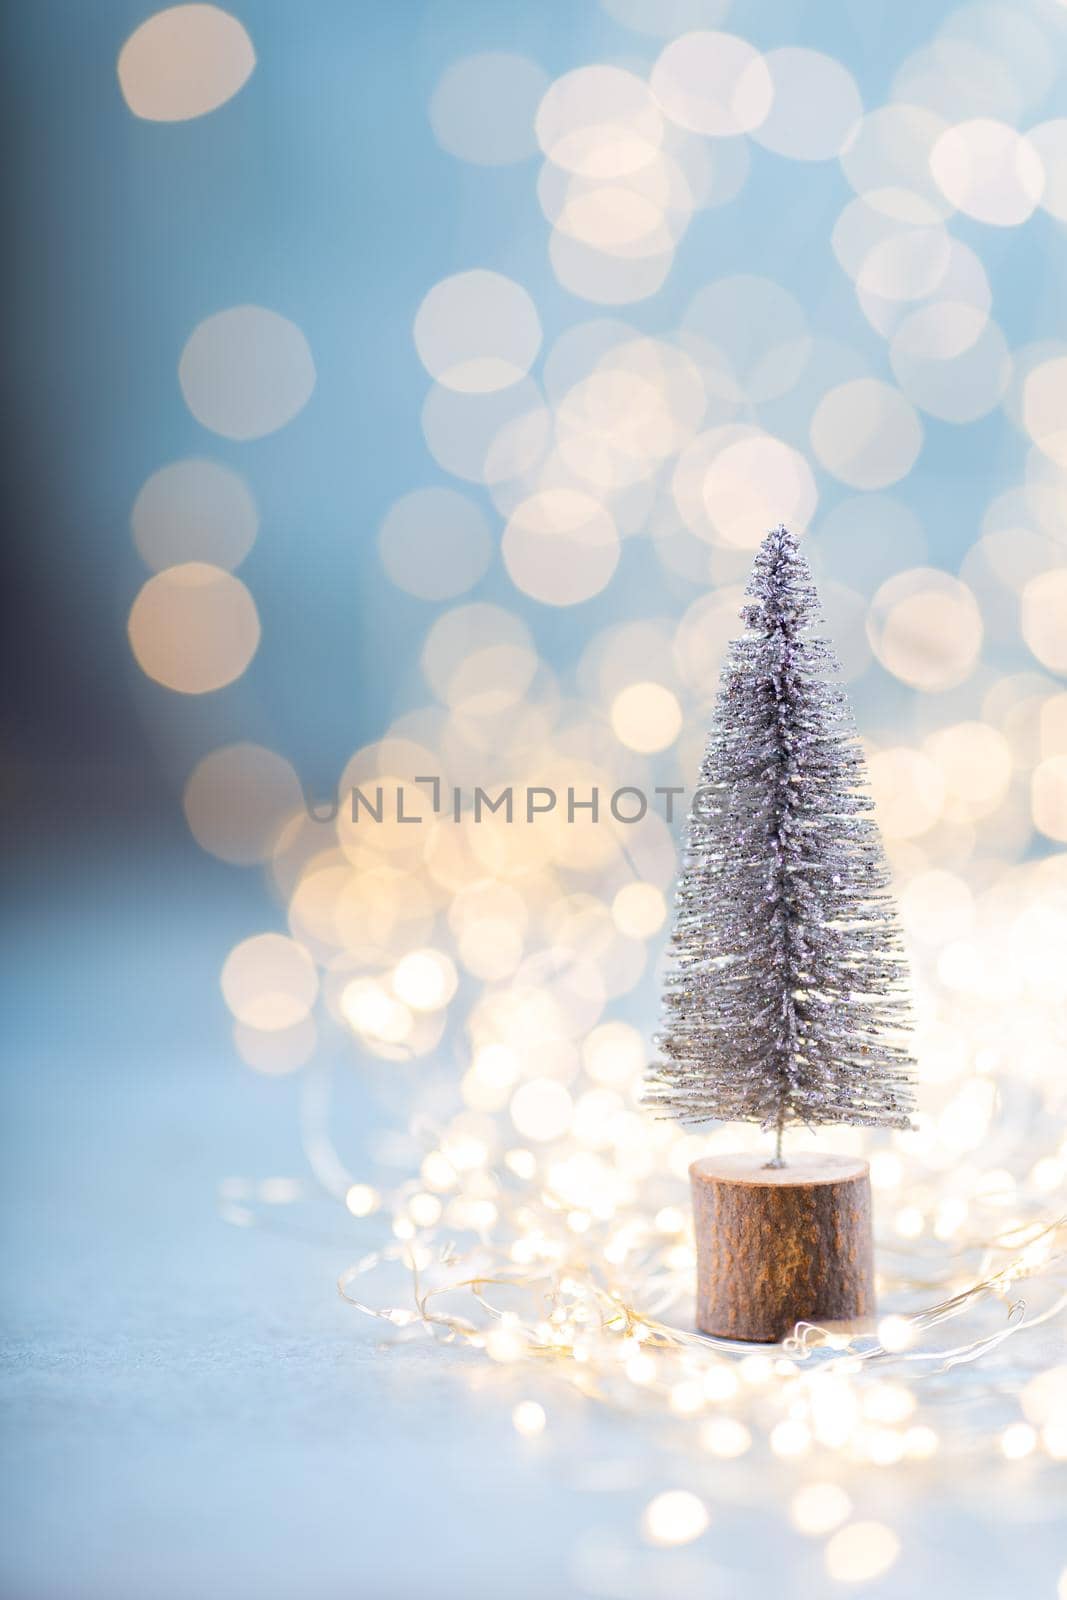 Christmas spruce with tree and blurred shiny lights. by gitusik